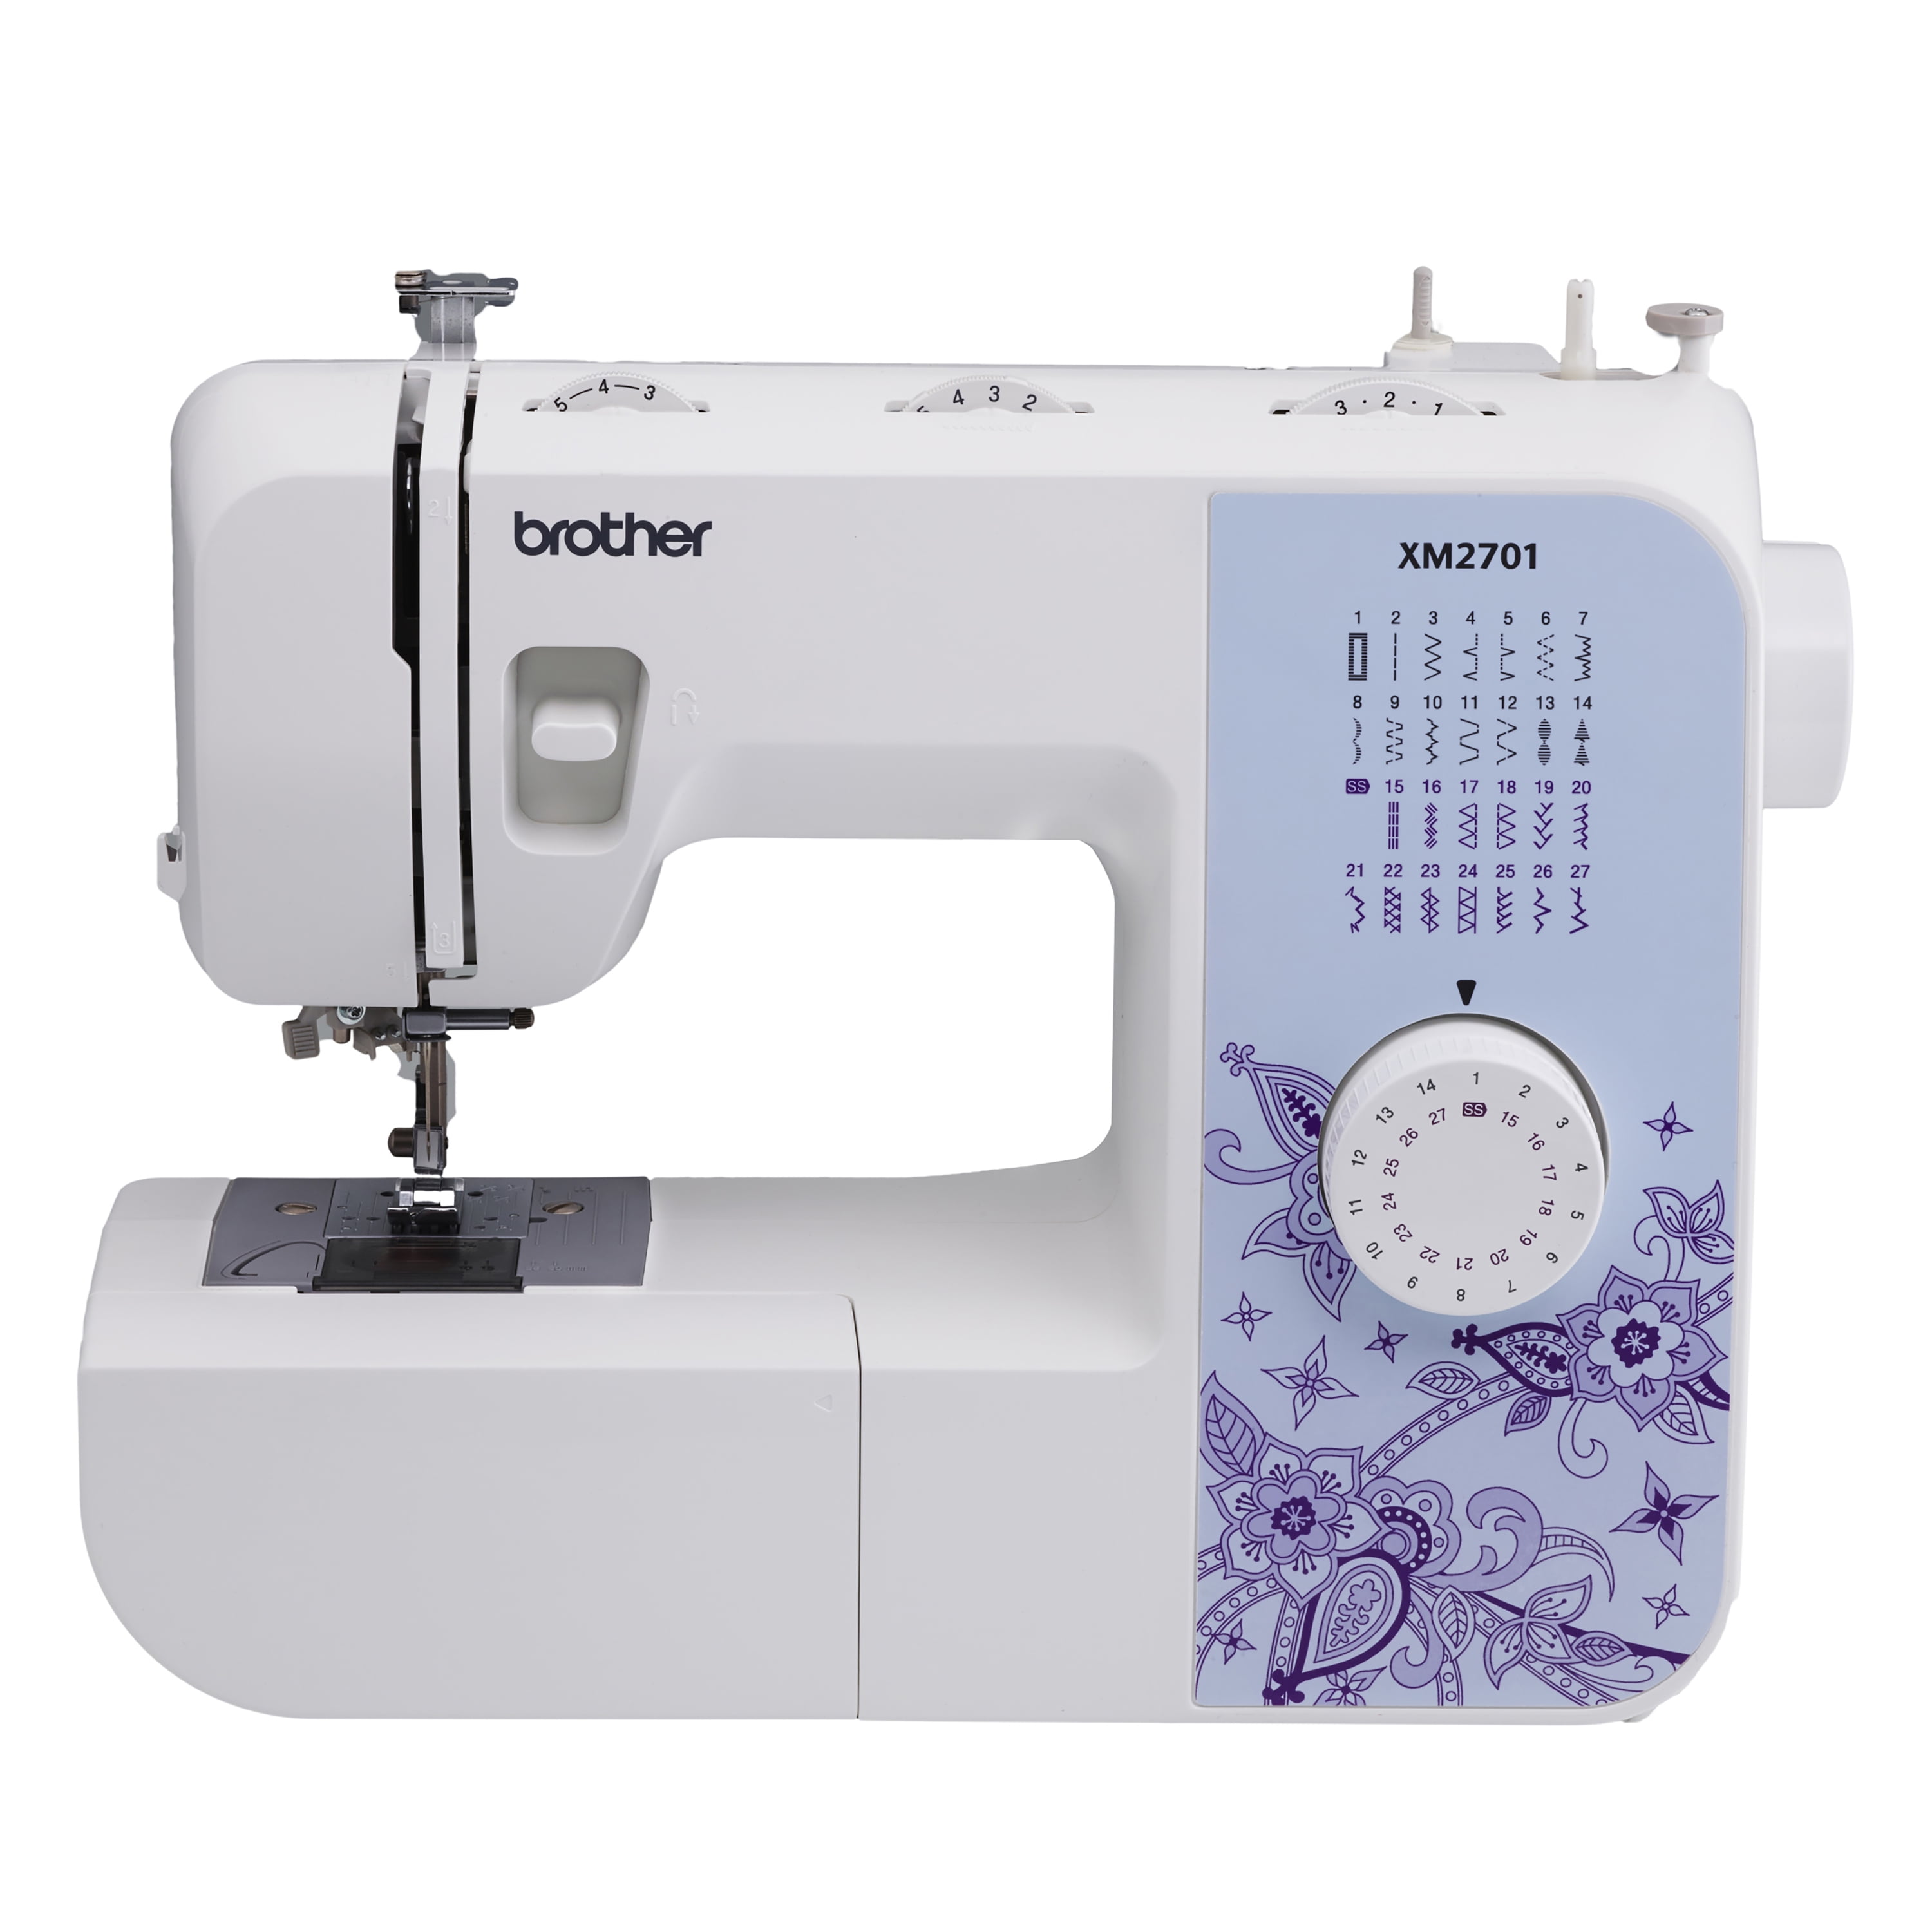 Brother XM2701 Portable, Mechanical, Full-Featured Sewing Machine with 27 Stitches - image 1 of 13